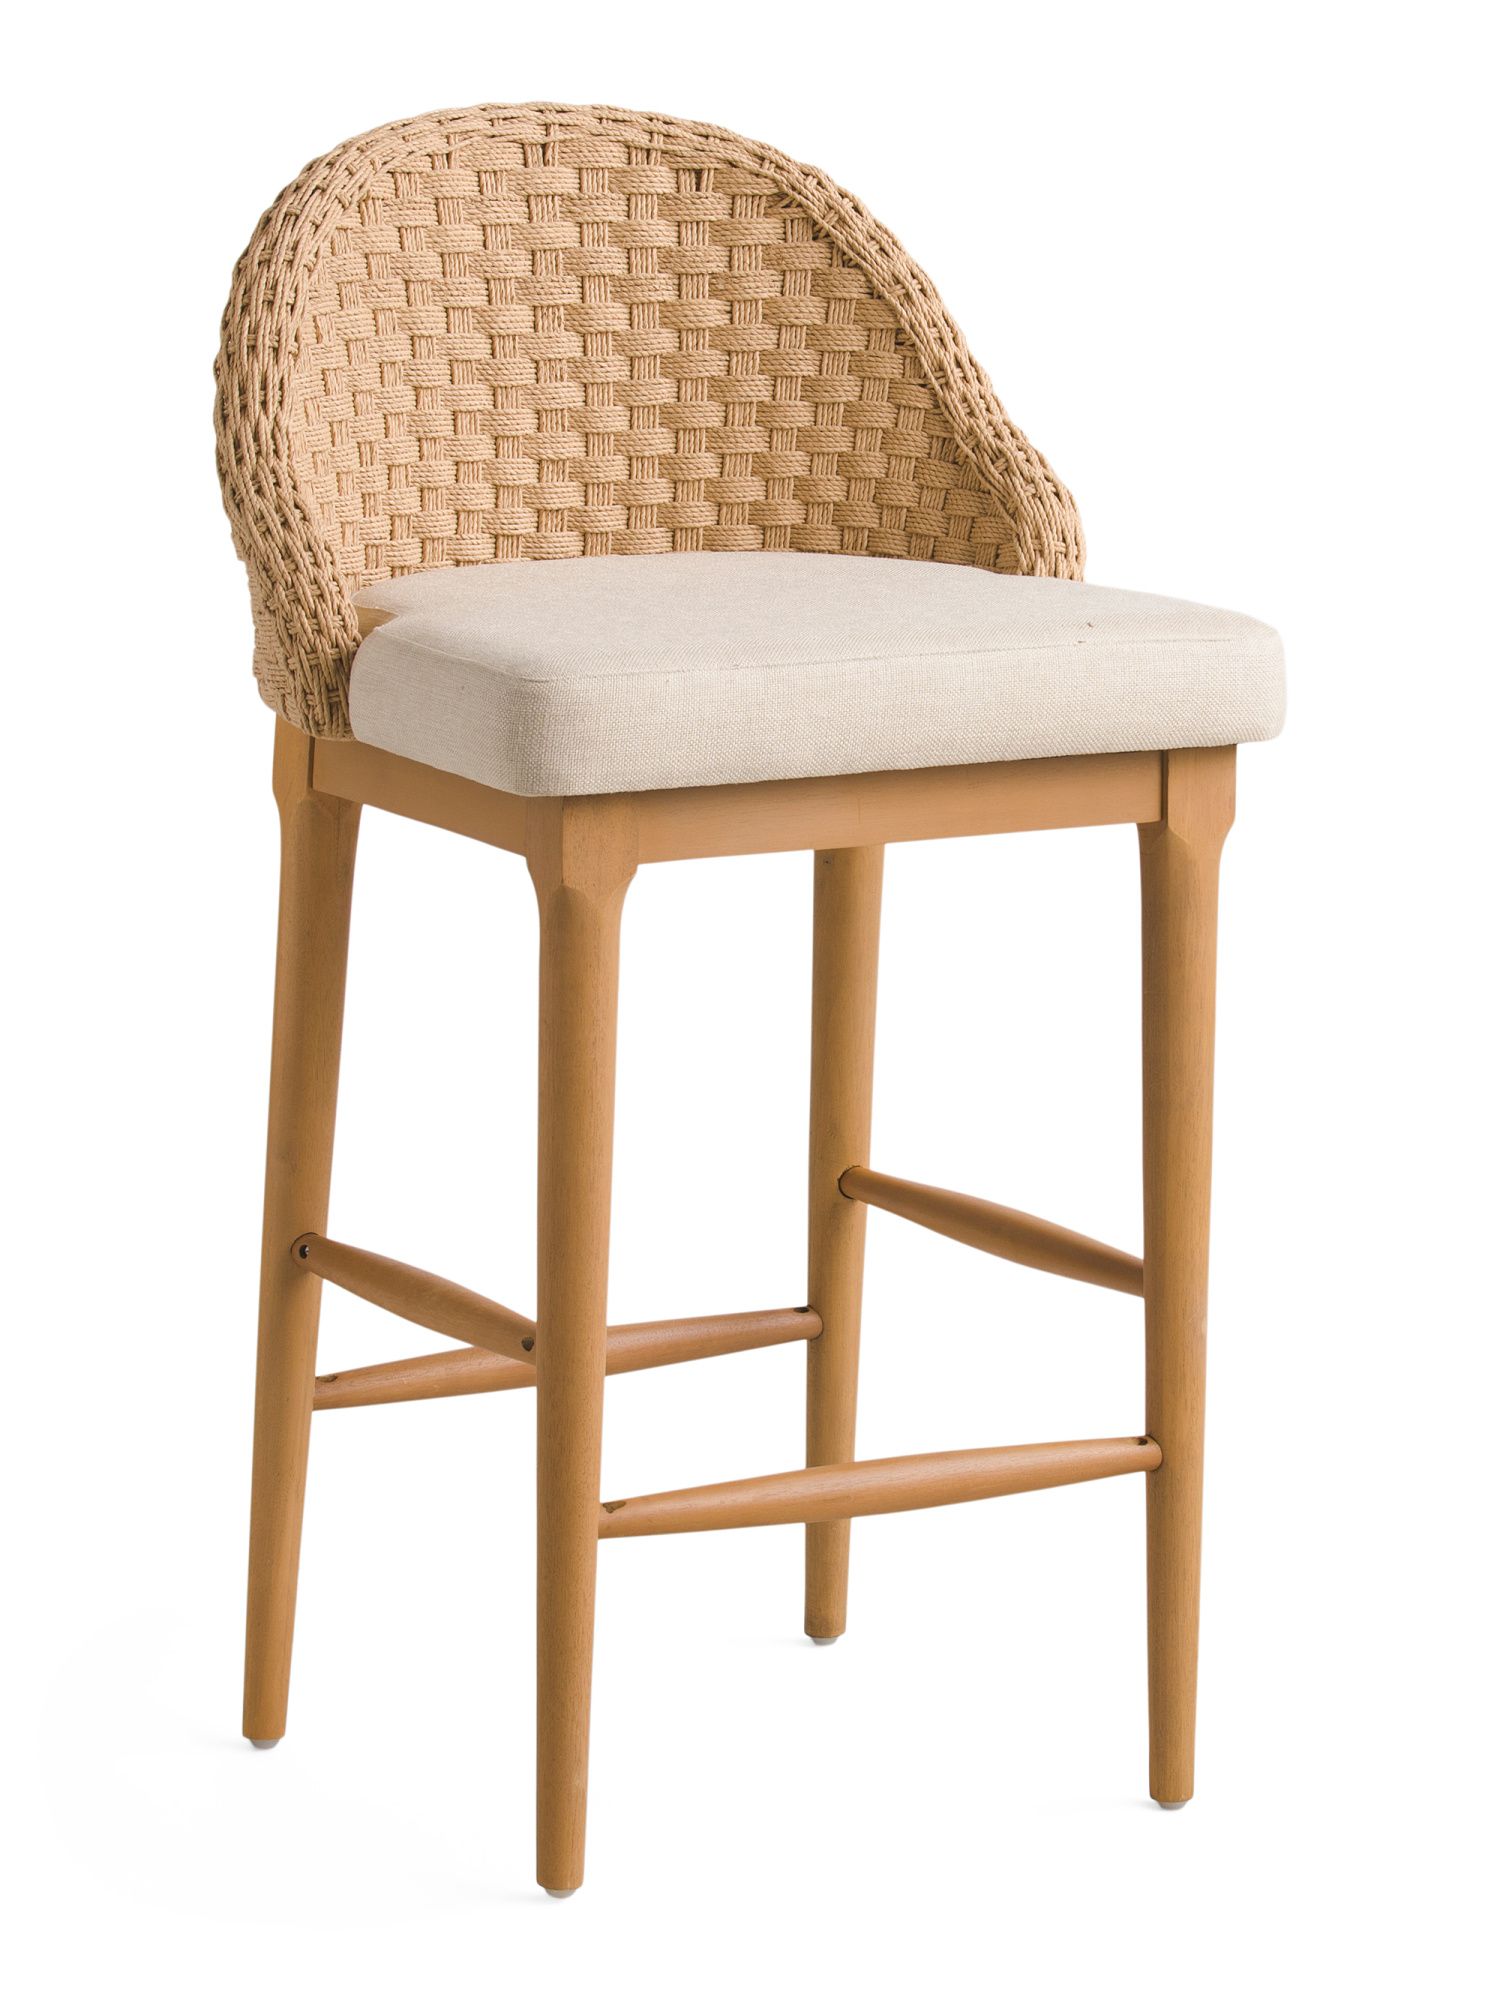 Solid Mahogany Counter Stool With Woven Curved Back | TJ Maxx